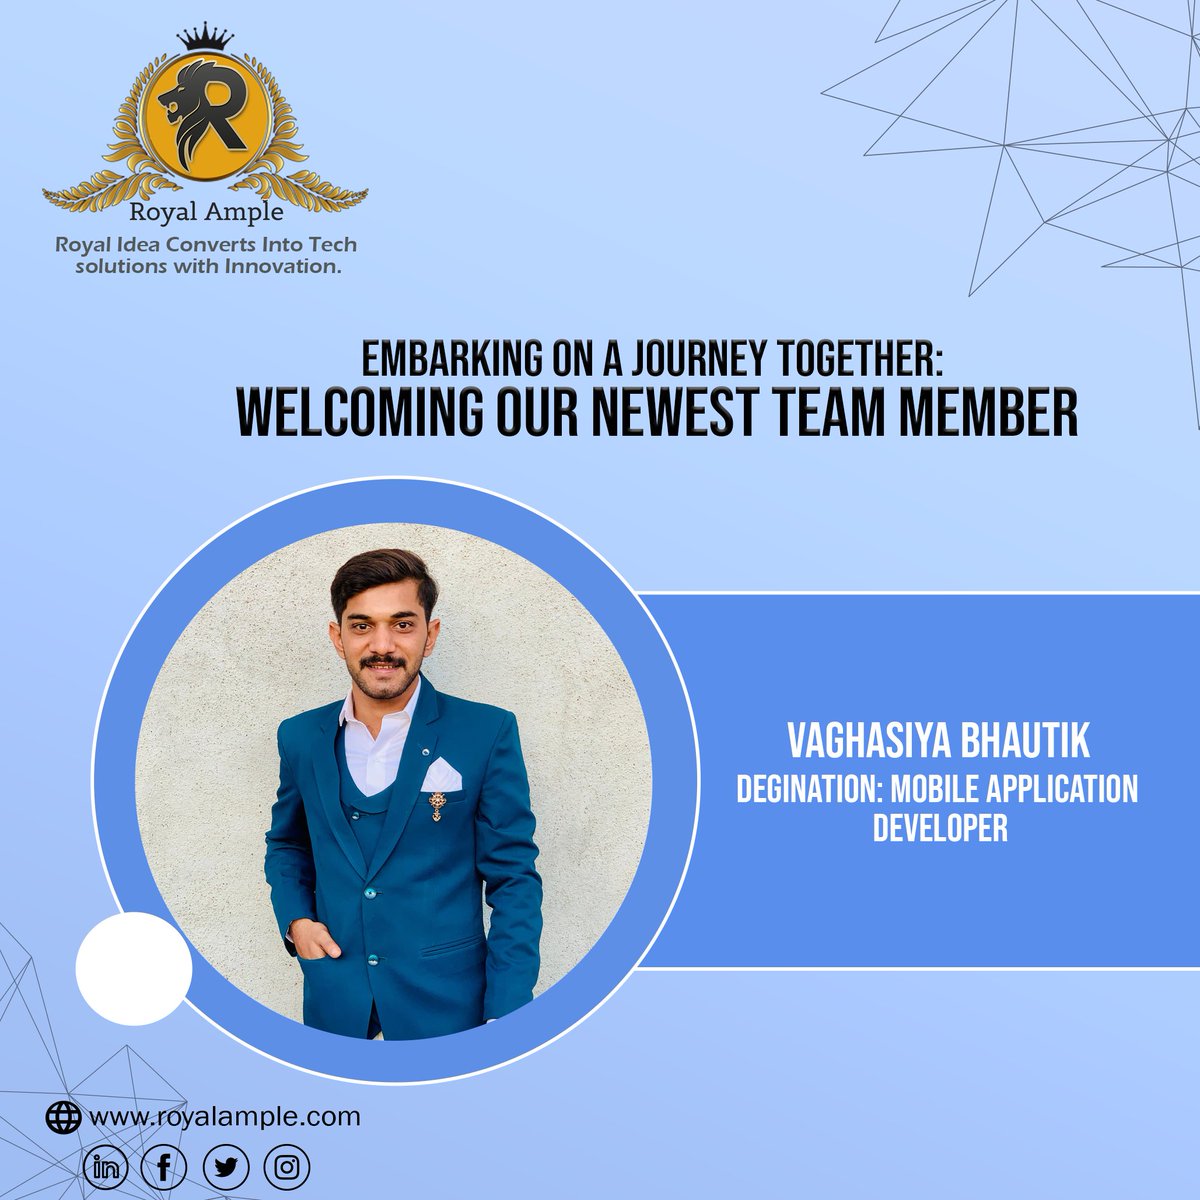 🎉 Thrilled to welcome our newest addition to the Royal Ample Team! Let's embark on this exciting journey together 👏 #newteammember #welcometotheteam